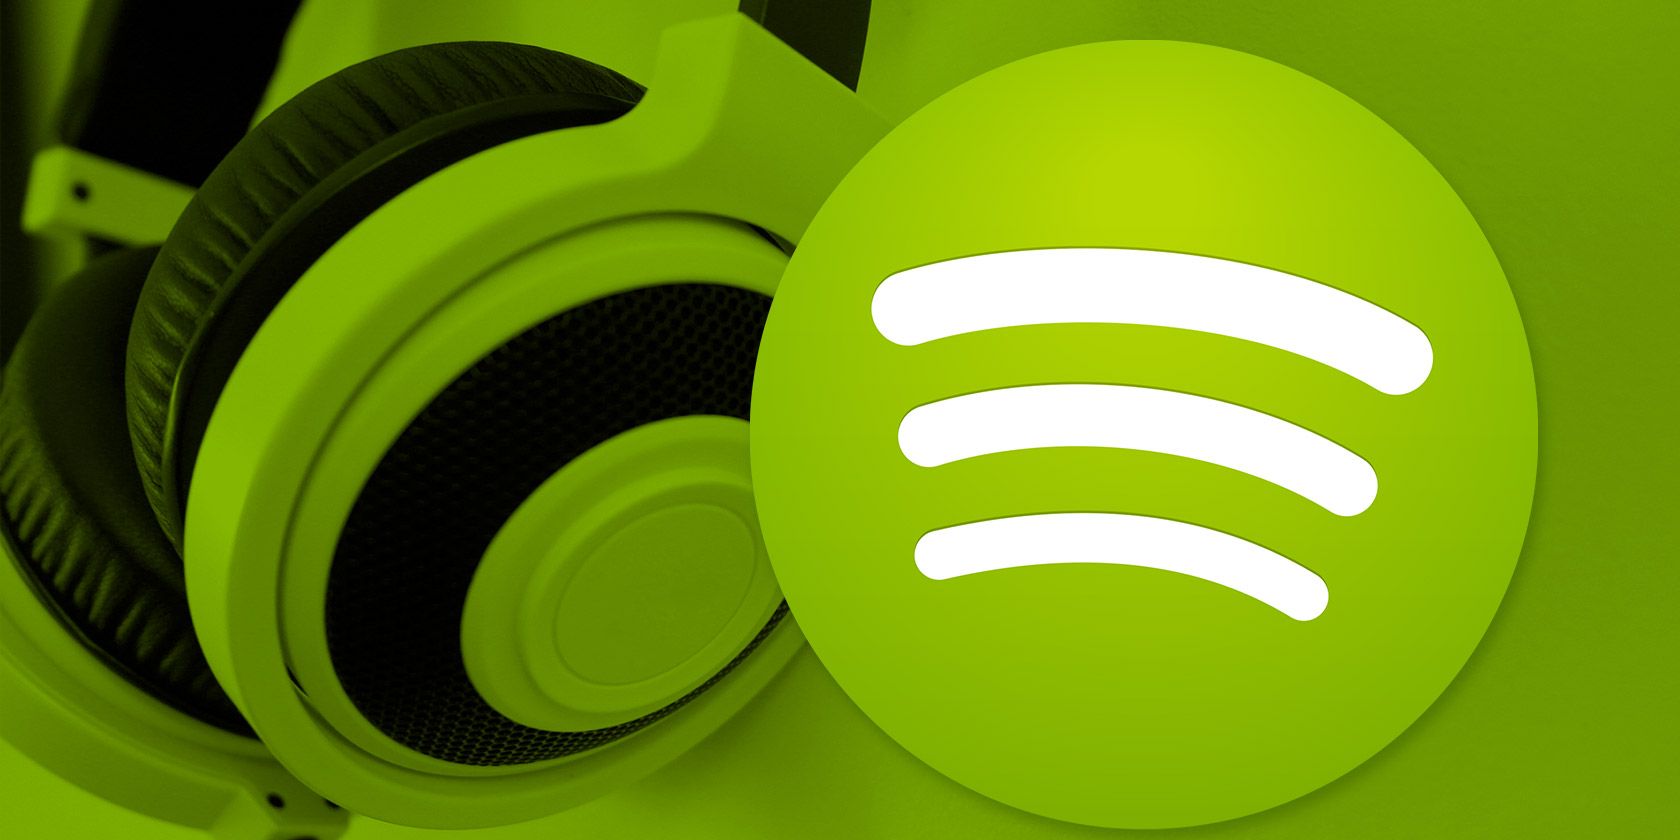 how to get free spotify premium 2016